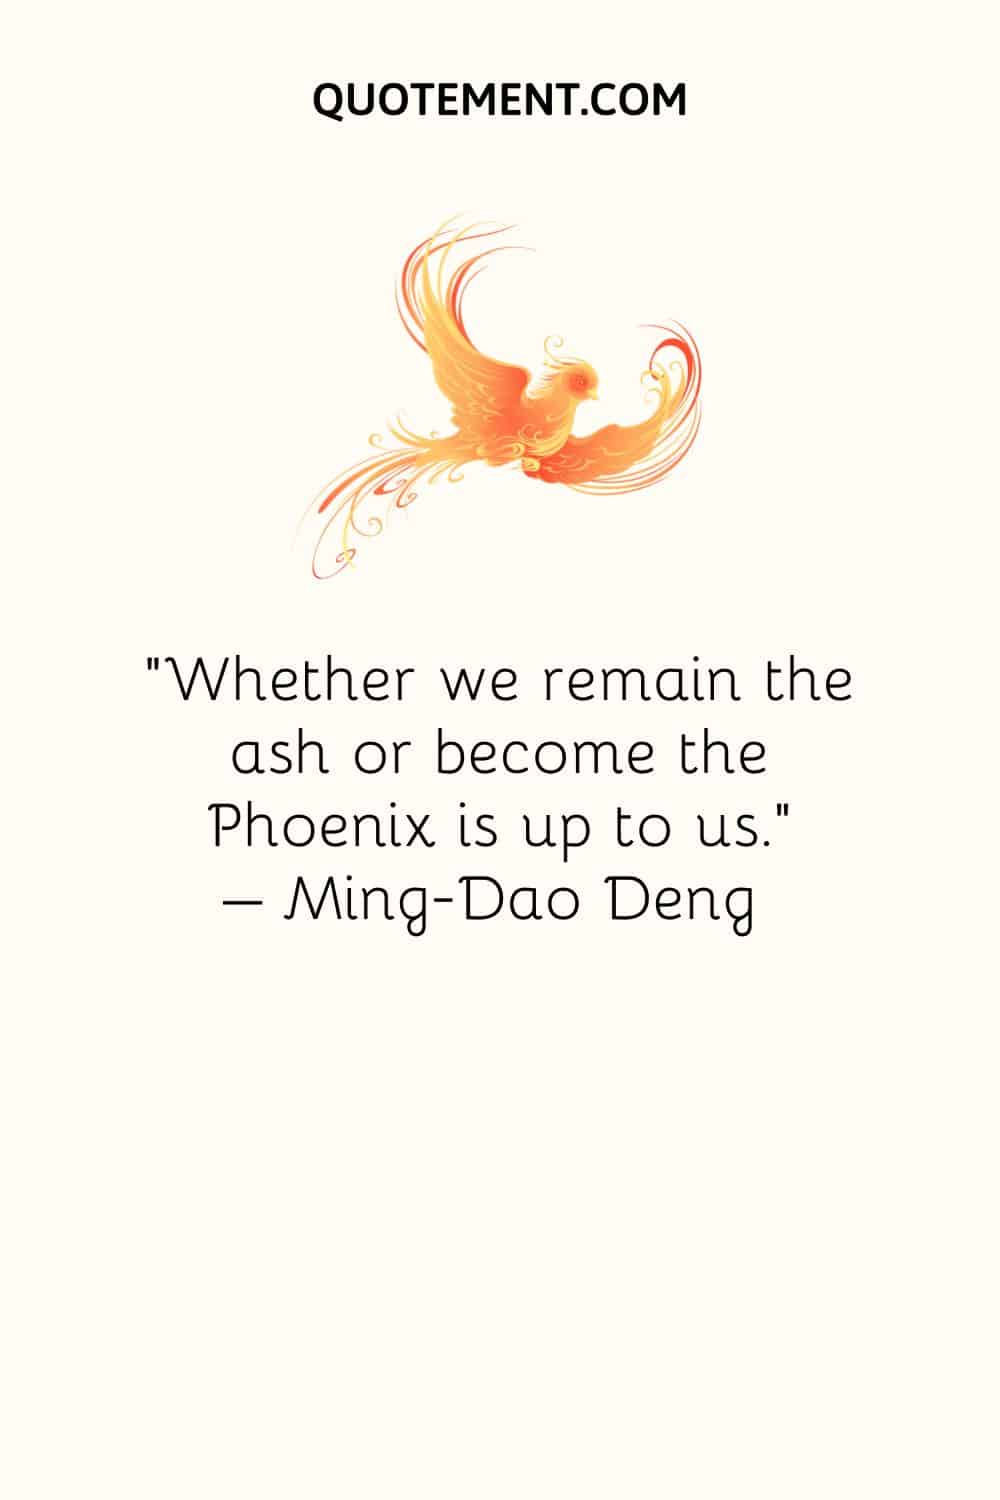 Whether we remain the ash or become the Phoenix is up to us